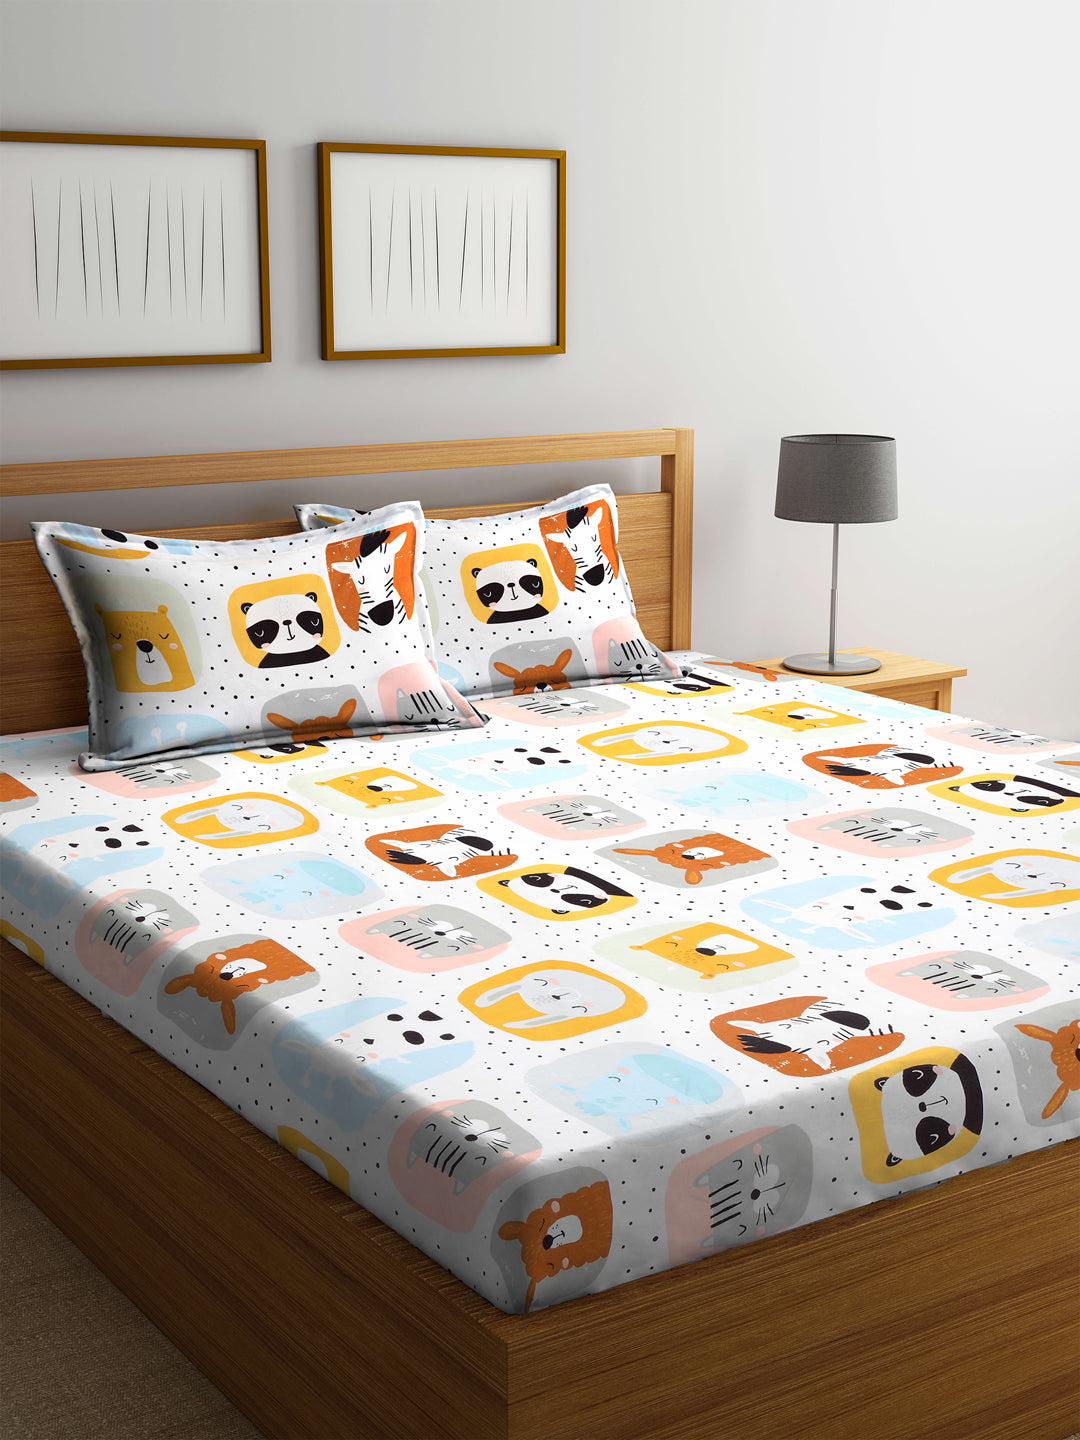 Special Kid's Edition King Size Panda Bed Sheet Set with 2 Pillow Covers by Klotthe® (250X220 cm)